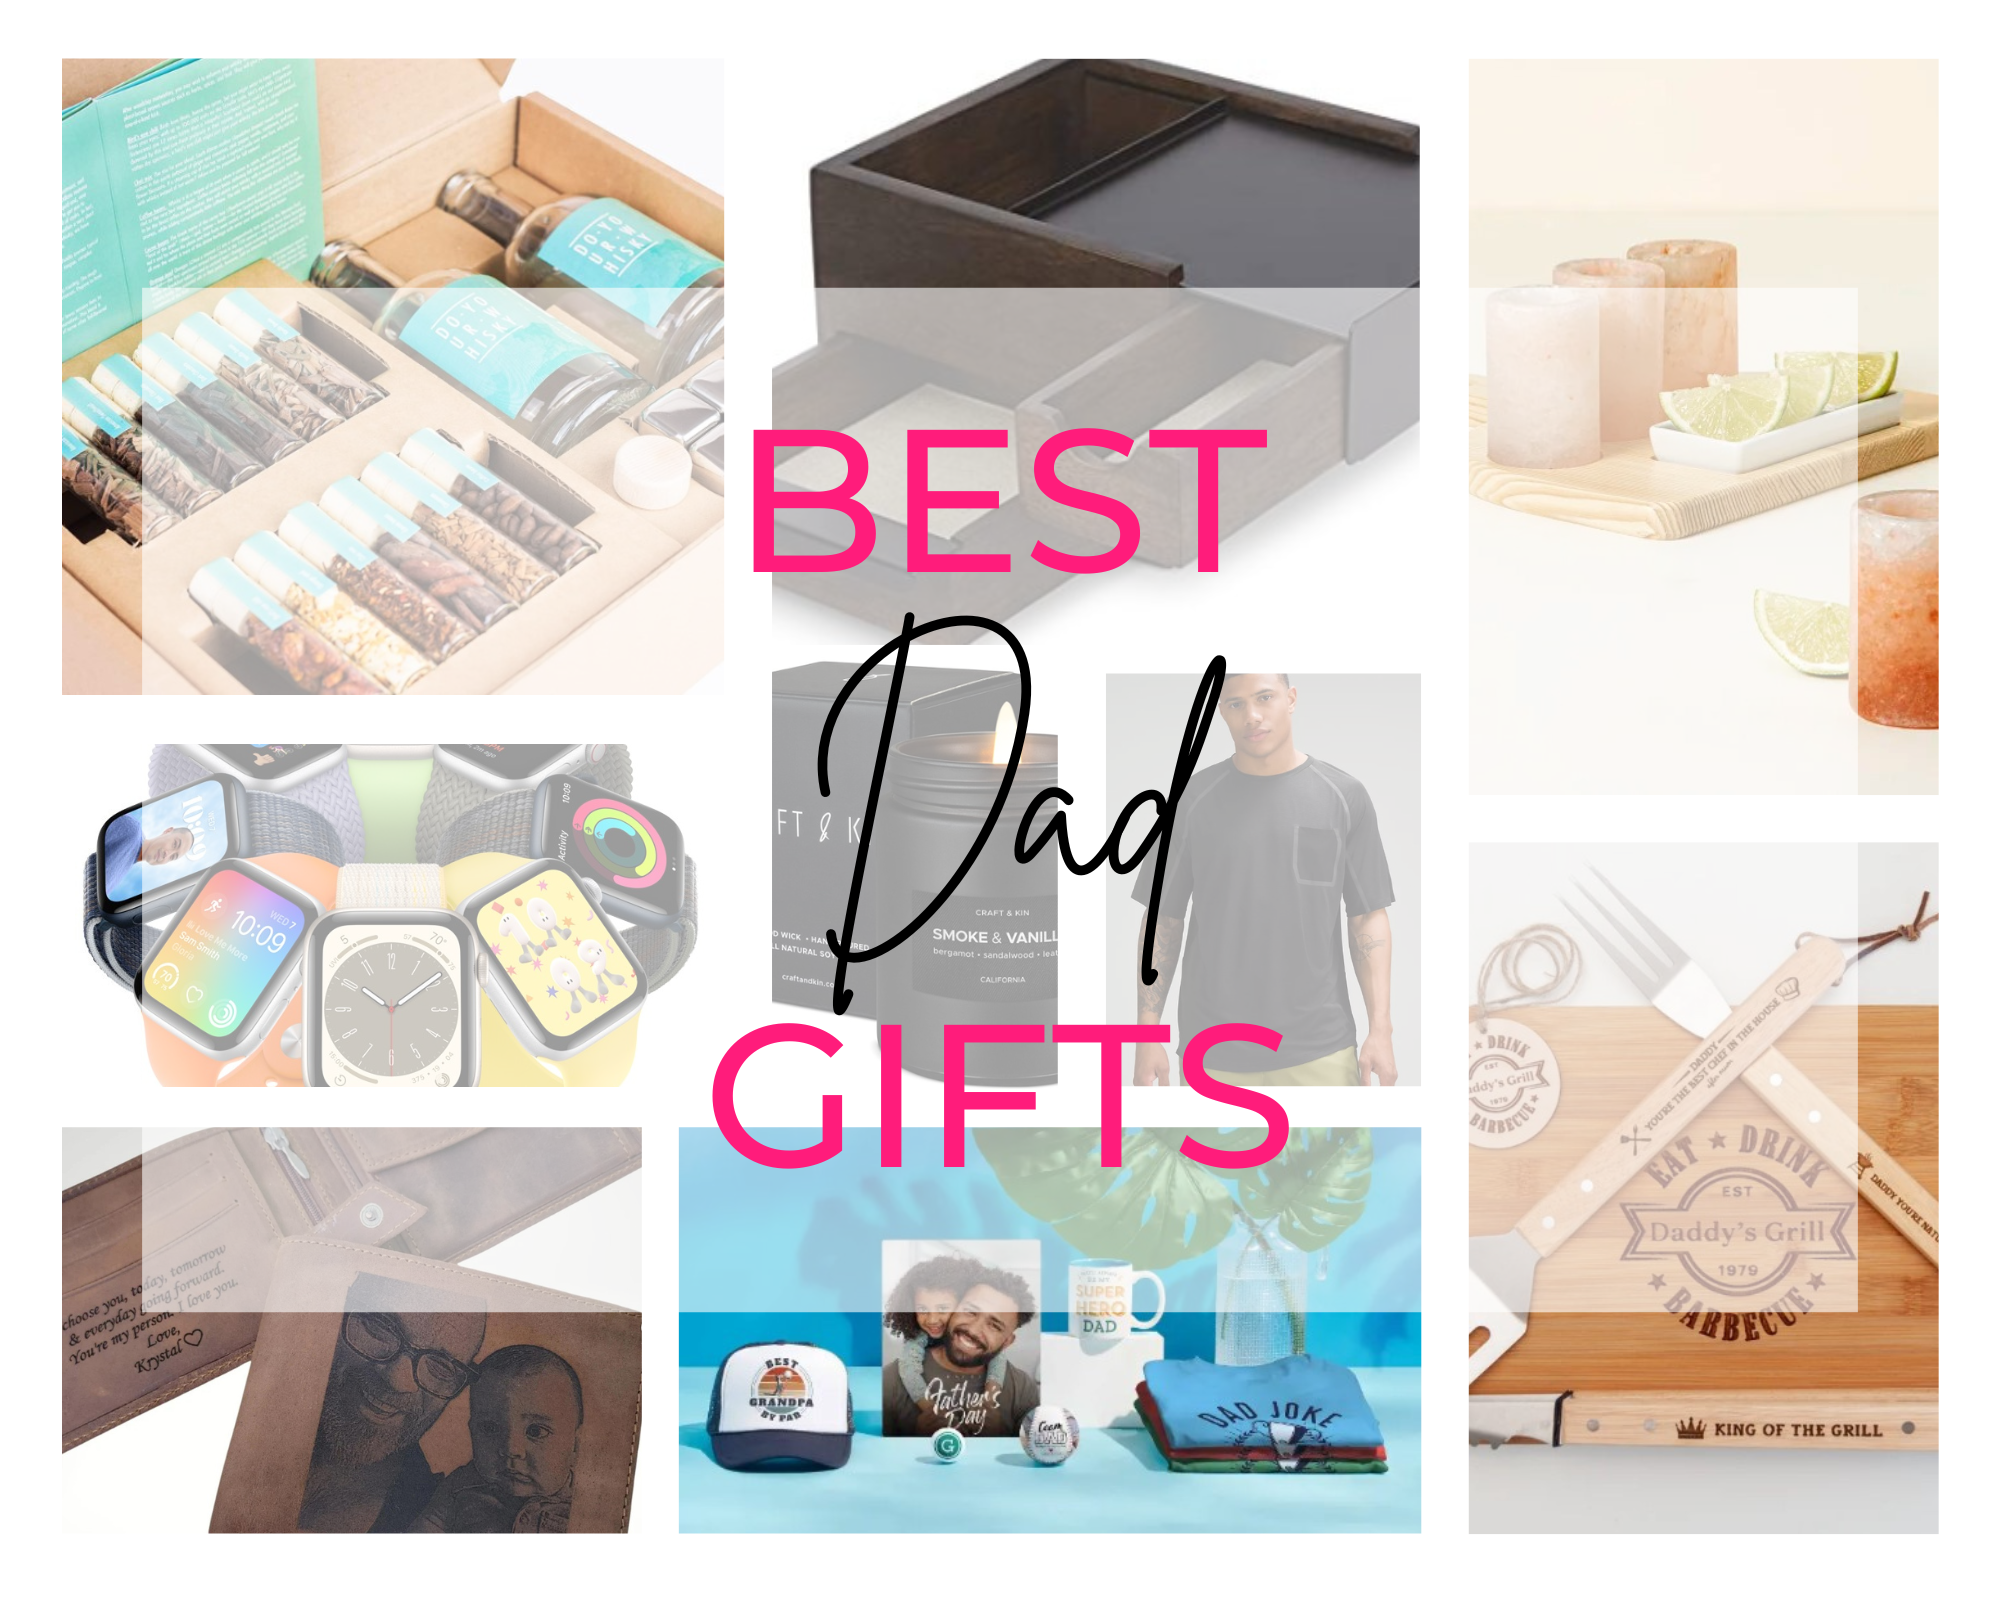 10 Gifts For Men Who Have Everything & Want Nothing